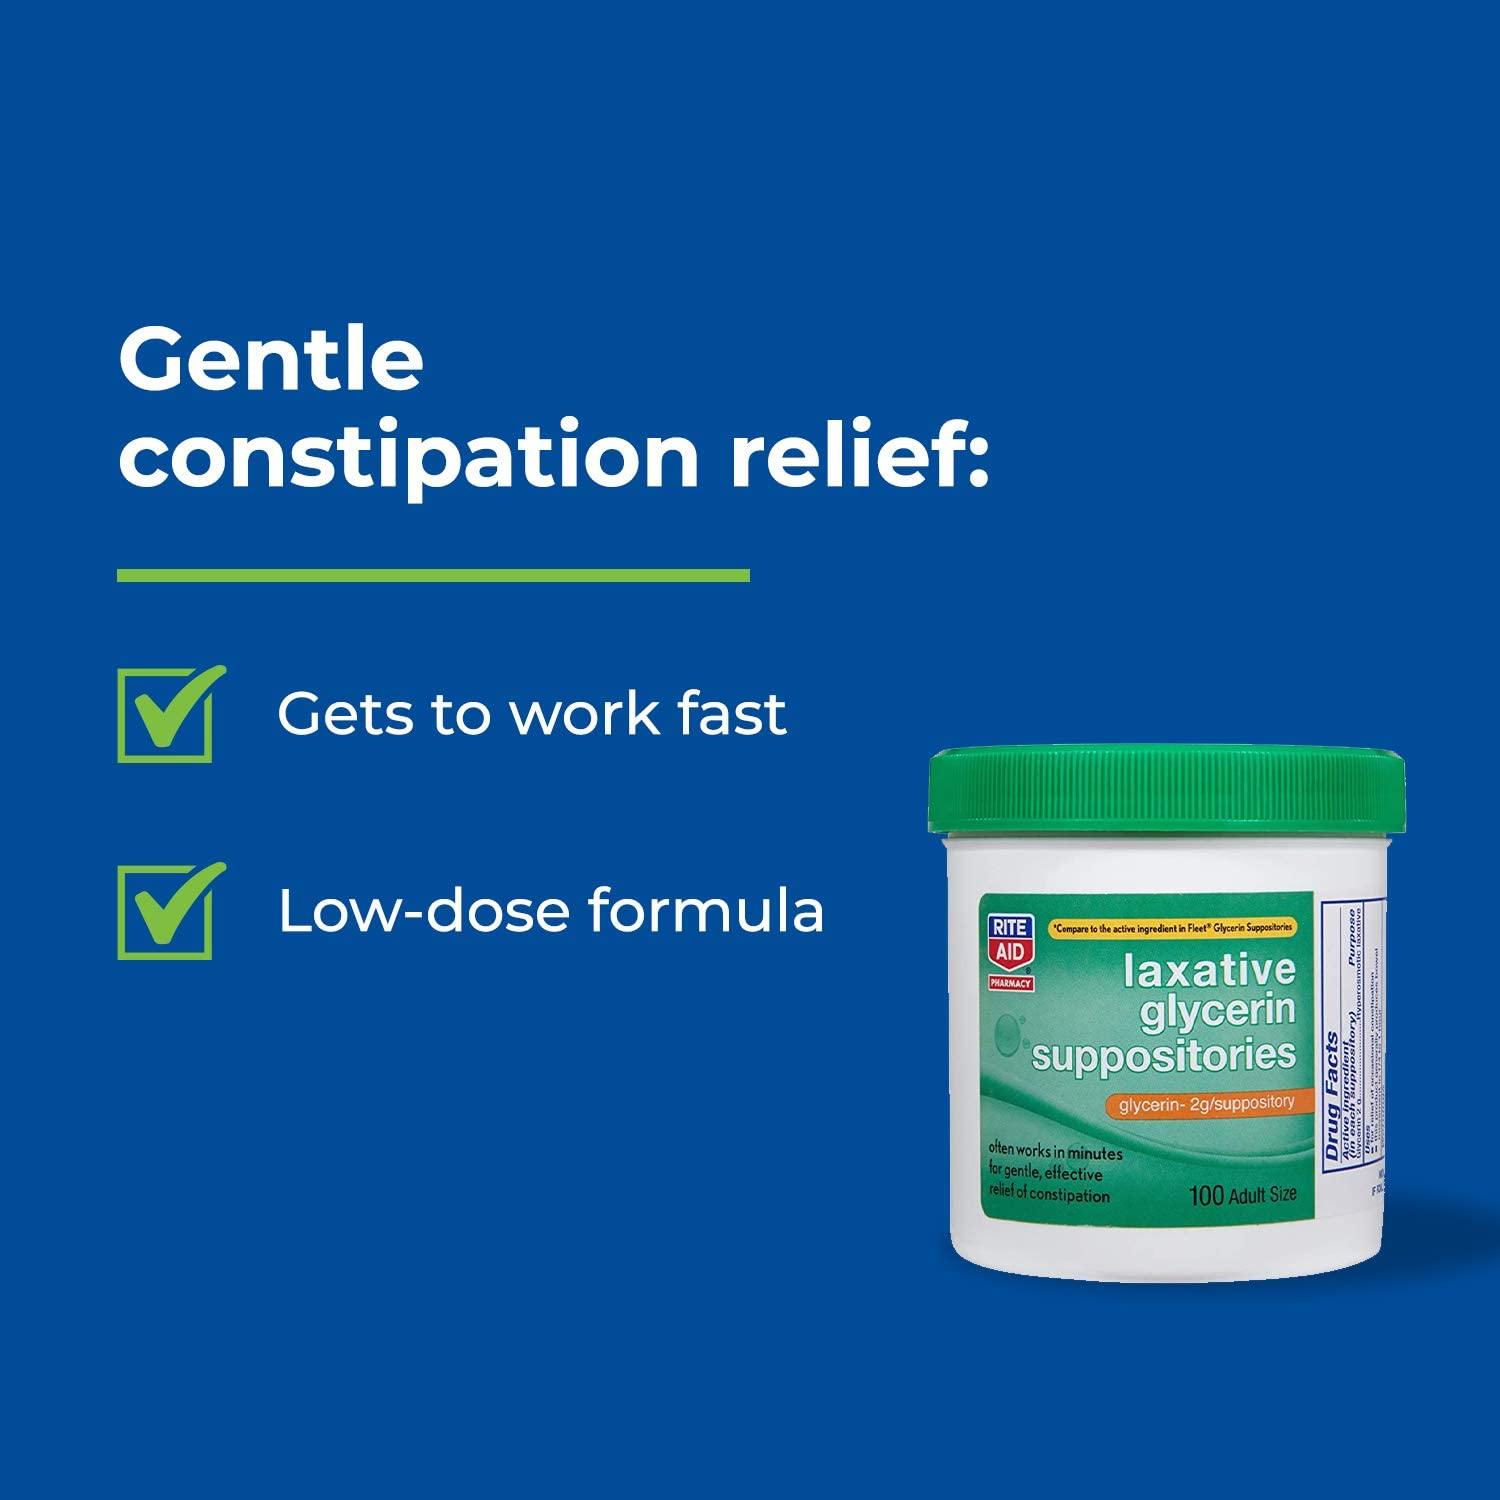 Rite Aid Laxative Glycerin Suppositories, 2 g - 100 Count Adult Size, Constipation Relief, Works in Minutes for Gentle Effective Relief of  Constipation